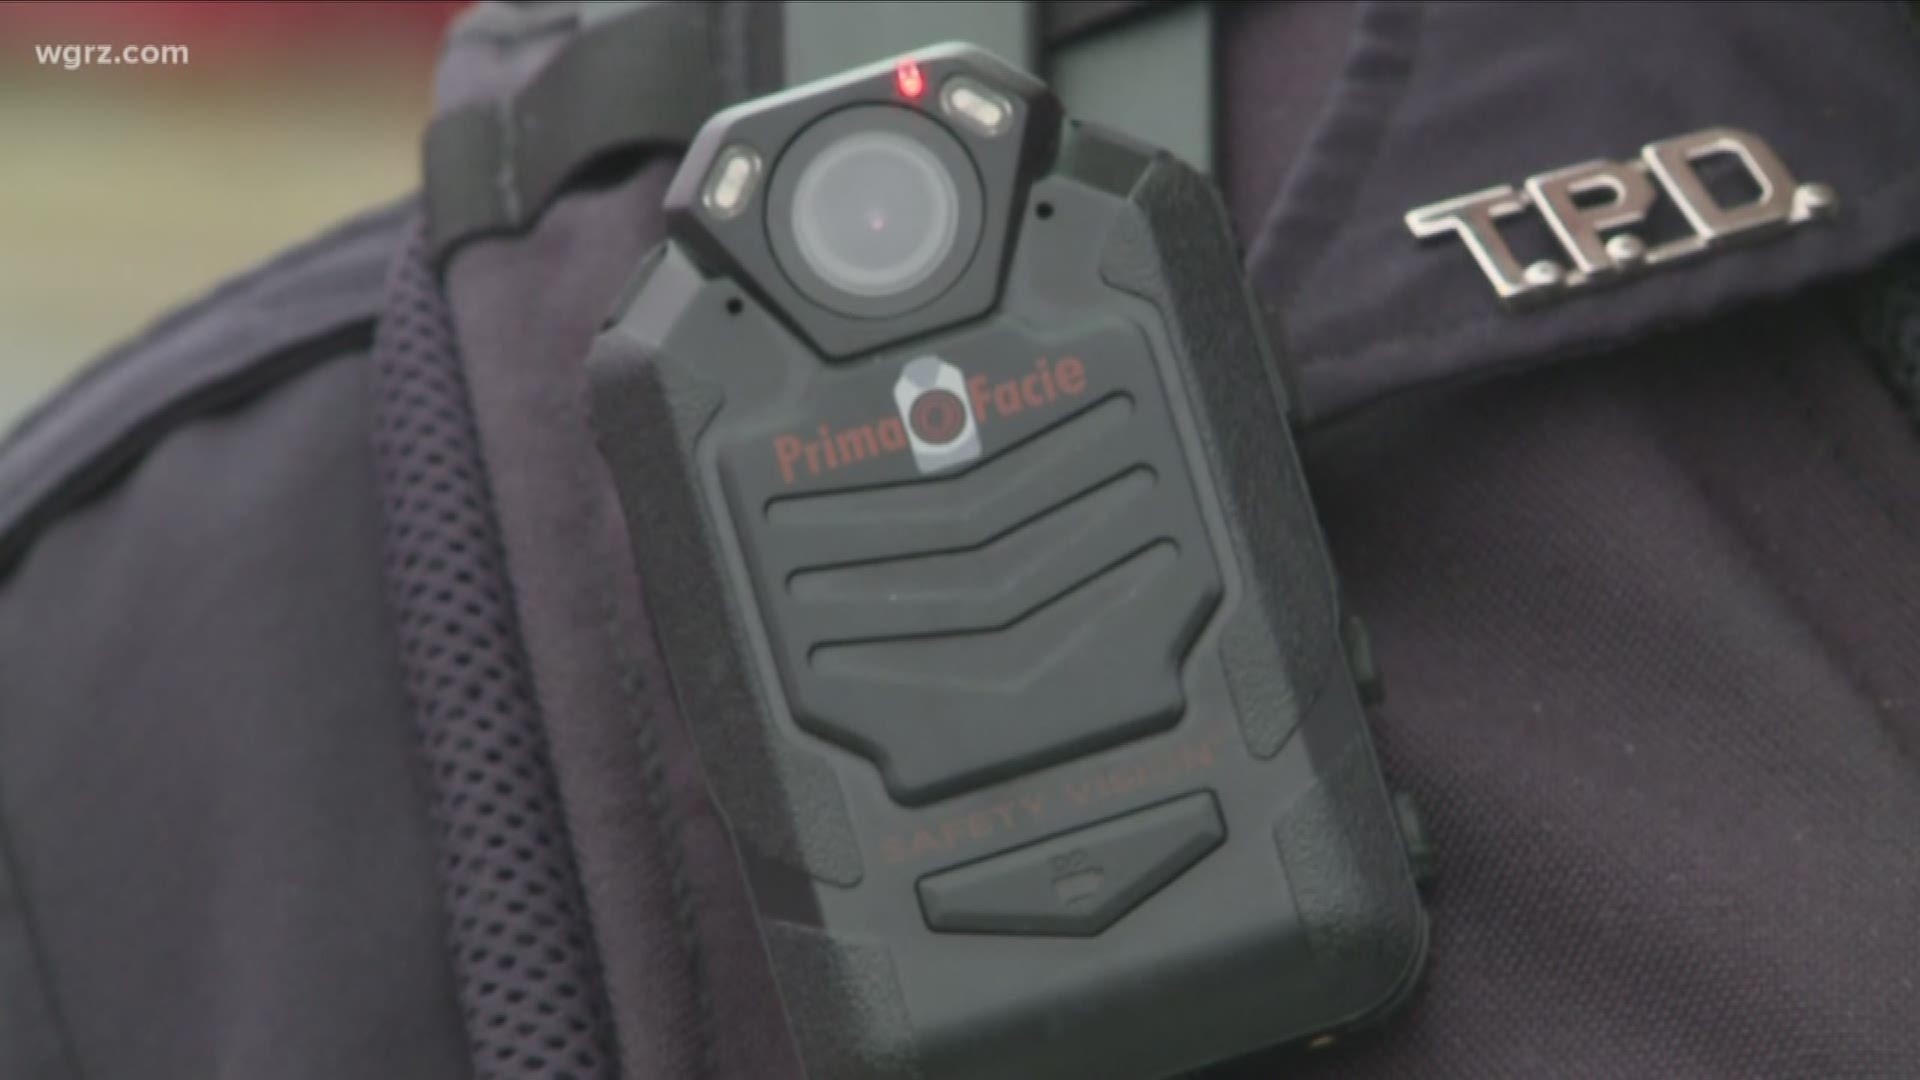 The New York State Supreme Court's Appellate Division court has ruled in favor of New York City and several media companies that filed briefs saying the city can release body camera footage without a court order.